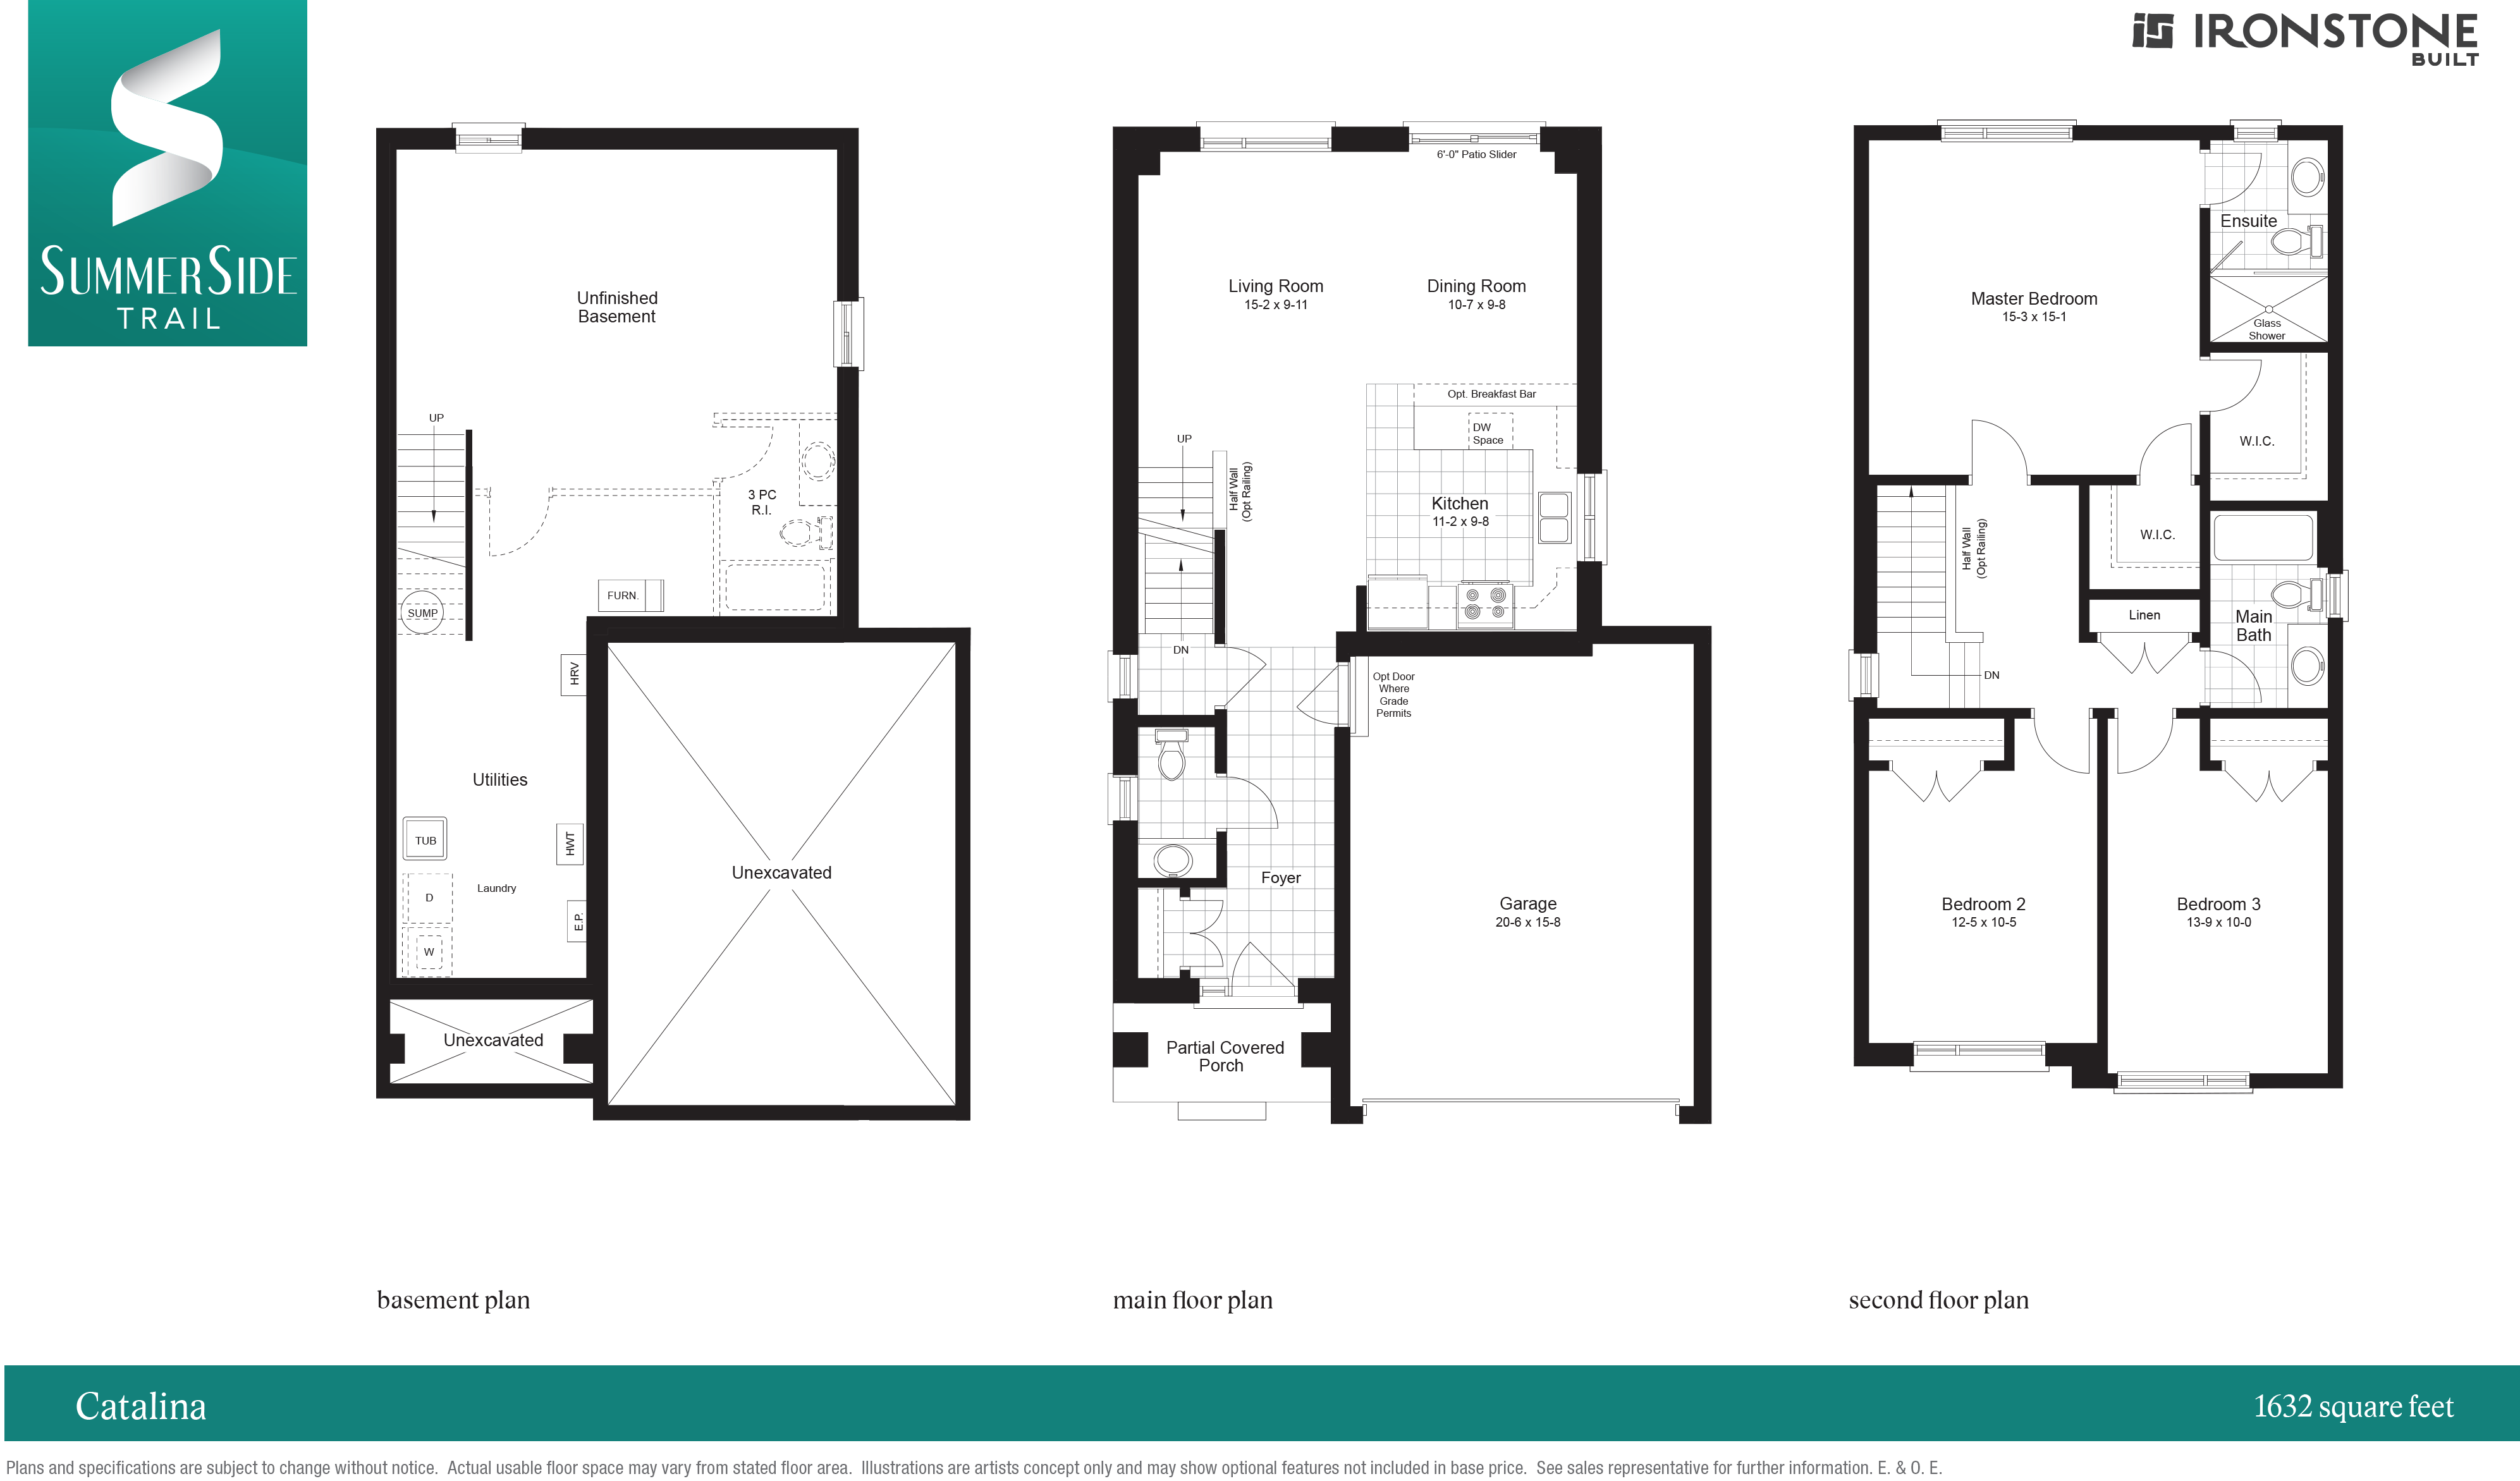 Catalina Floor Plan of Summerside Trail with undefined beds